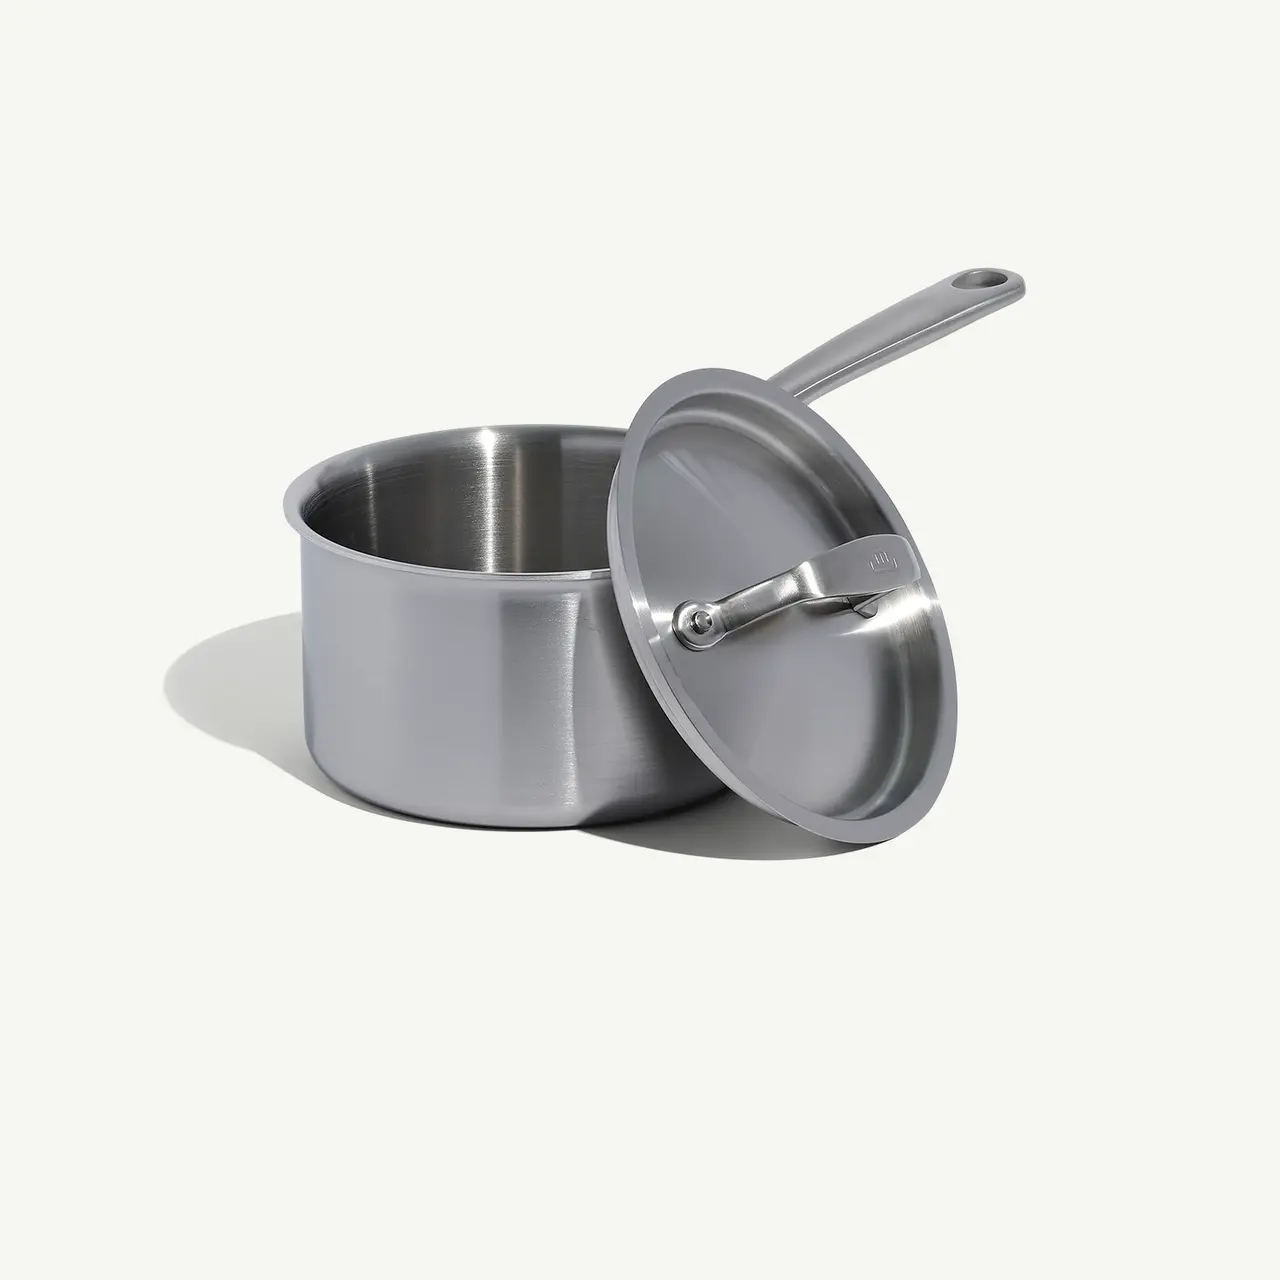 A stainless steel saucepan with a lid on a light background.